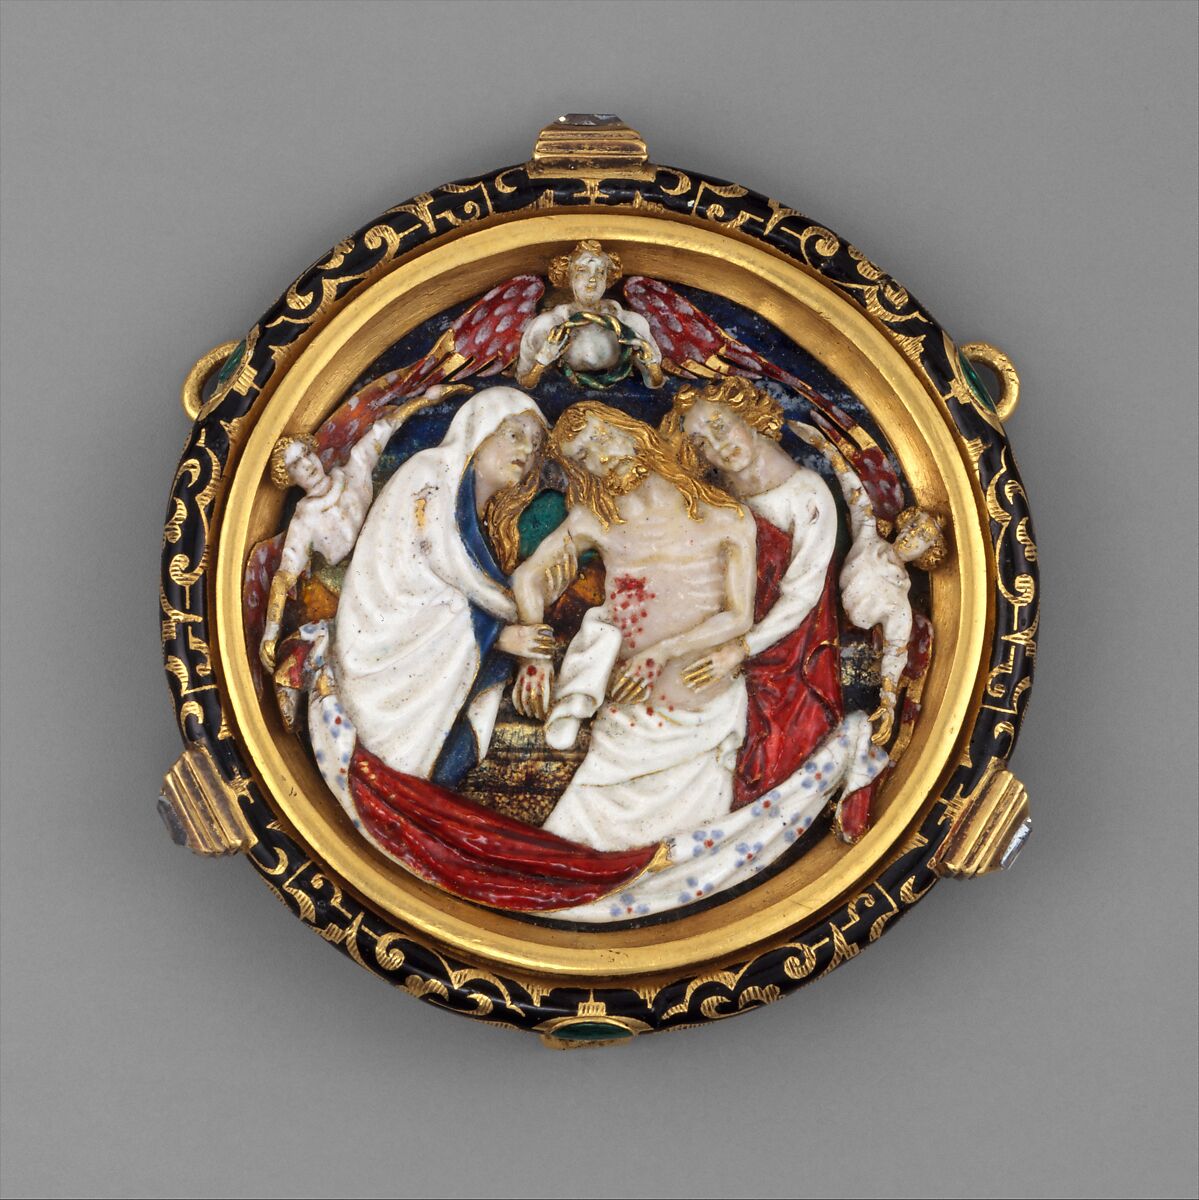 The Dead Christ with the Virgin, Saint John, and Angels, Opaque and translucent enamel on gold, French 